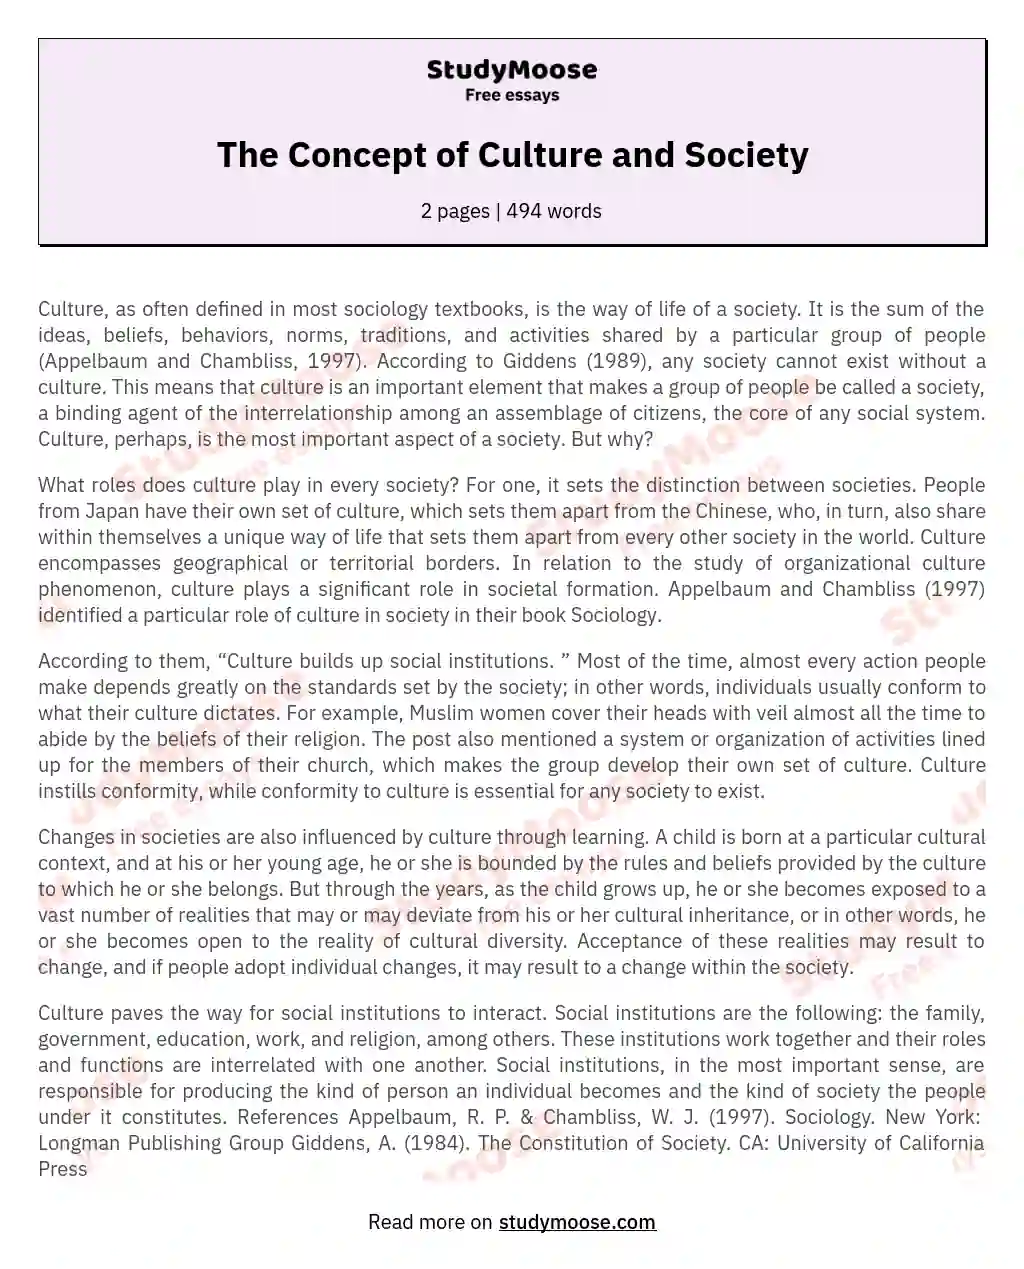 The Concept of Culture and Society essay